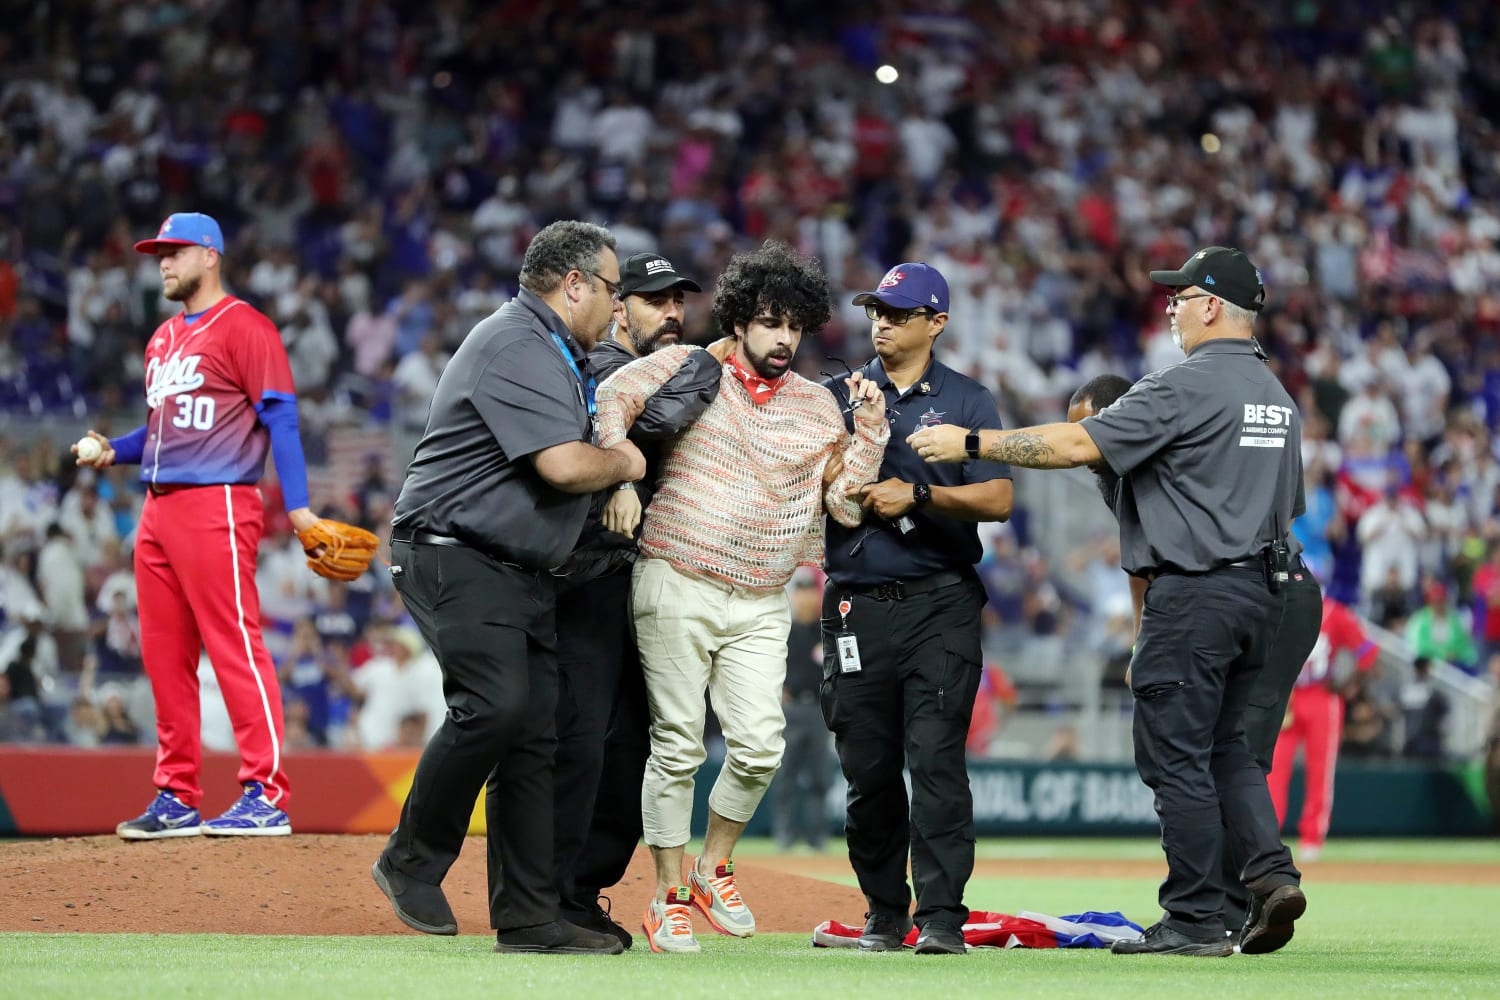 Protesters gather in Miami and run onto the field at Cuba-U.S. World Baseball Classic semifinal